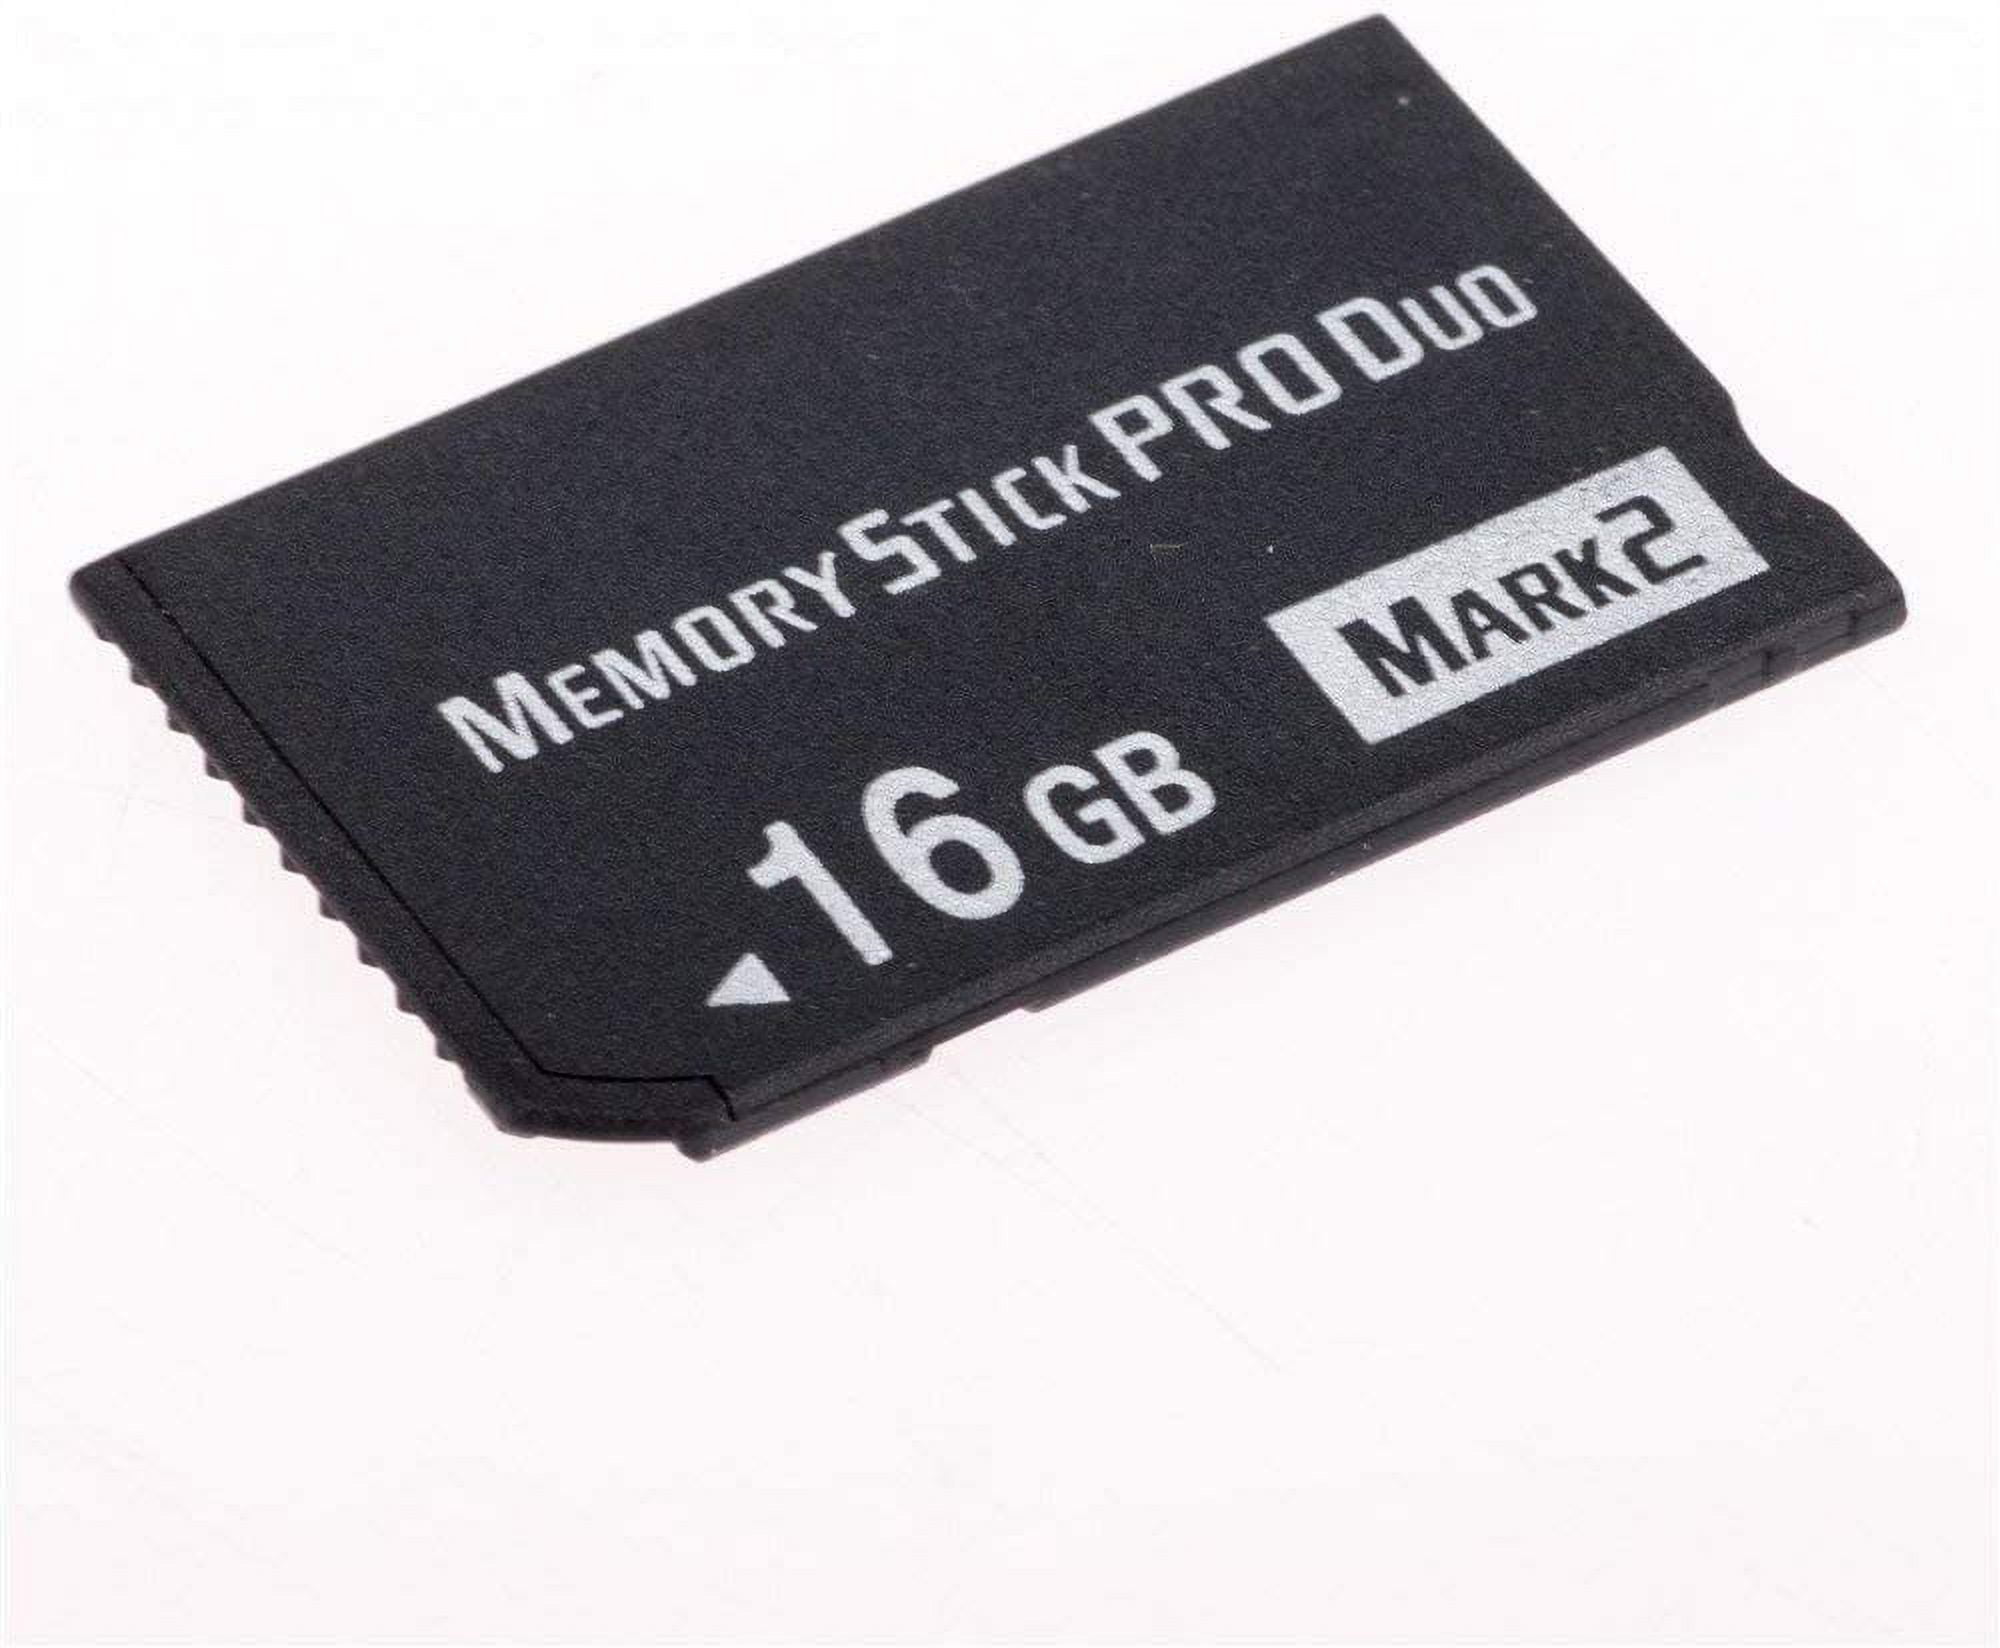  MS 16GB High Speed Memory Stick Pro Duo(Mark2) for PSP